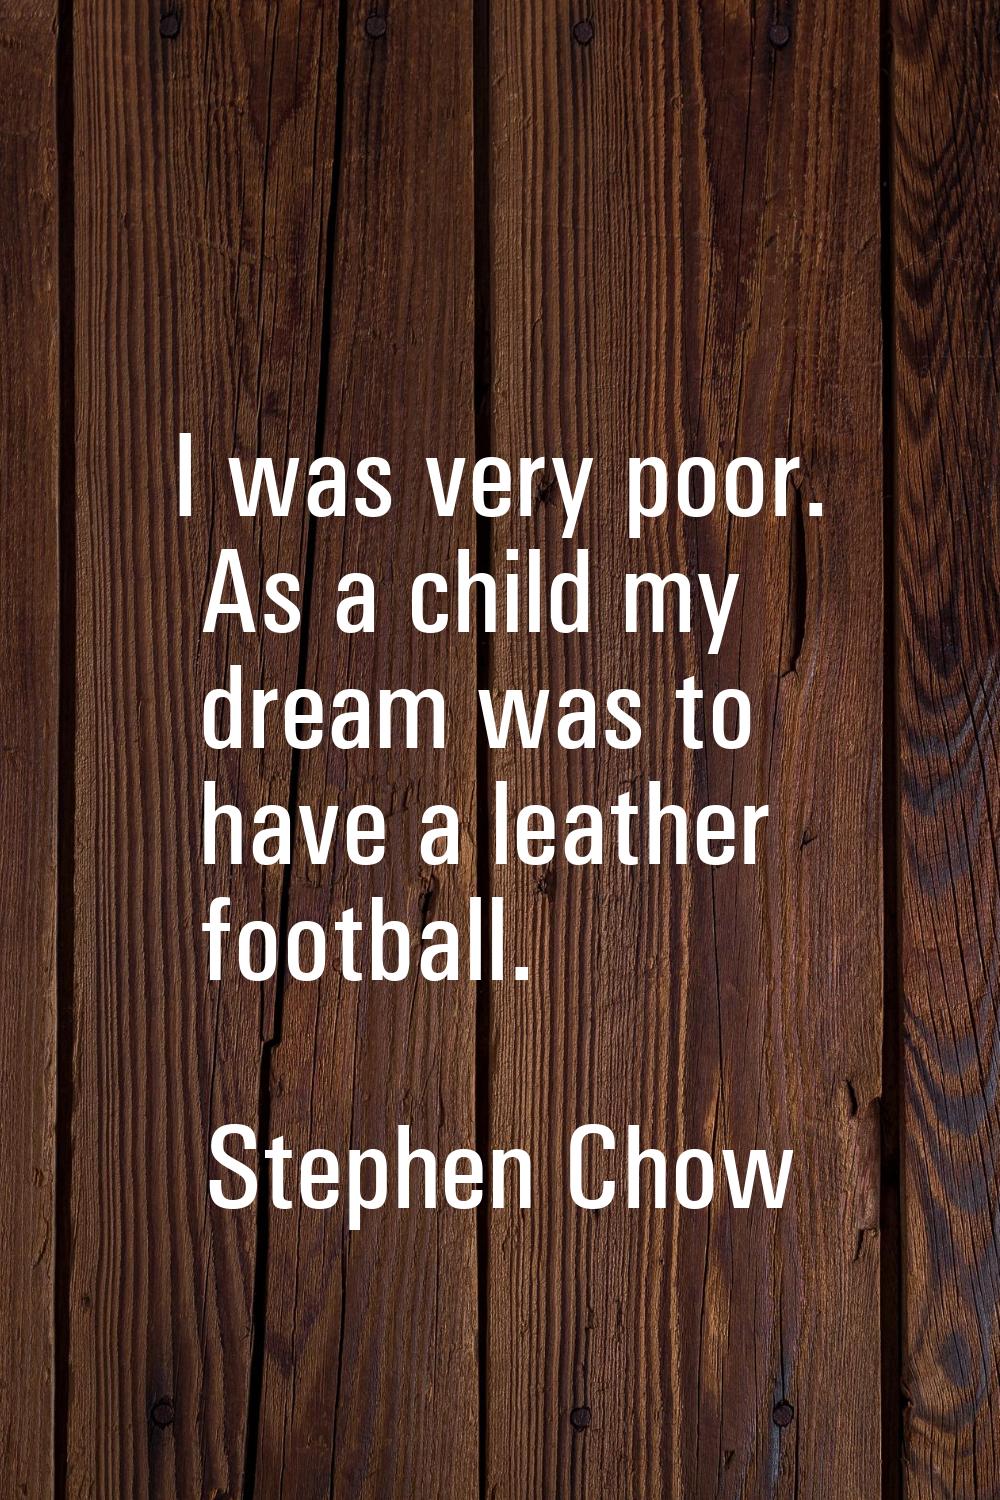 I was very poor. As a child my dream was to have a leather football.